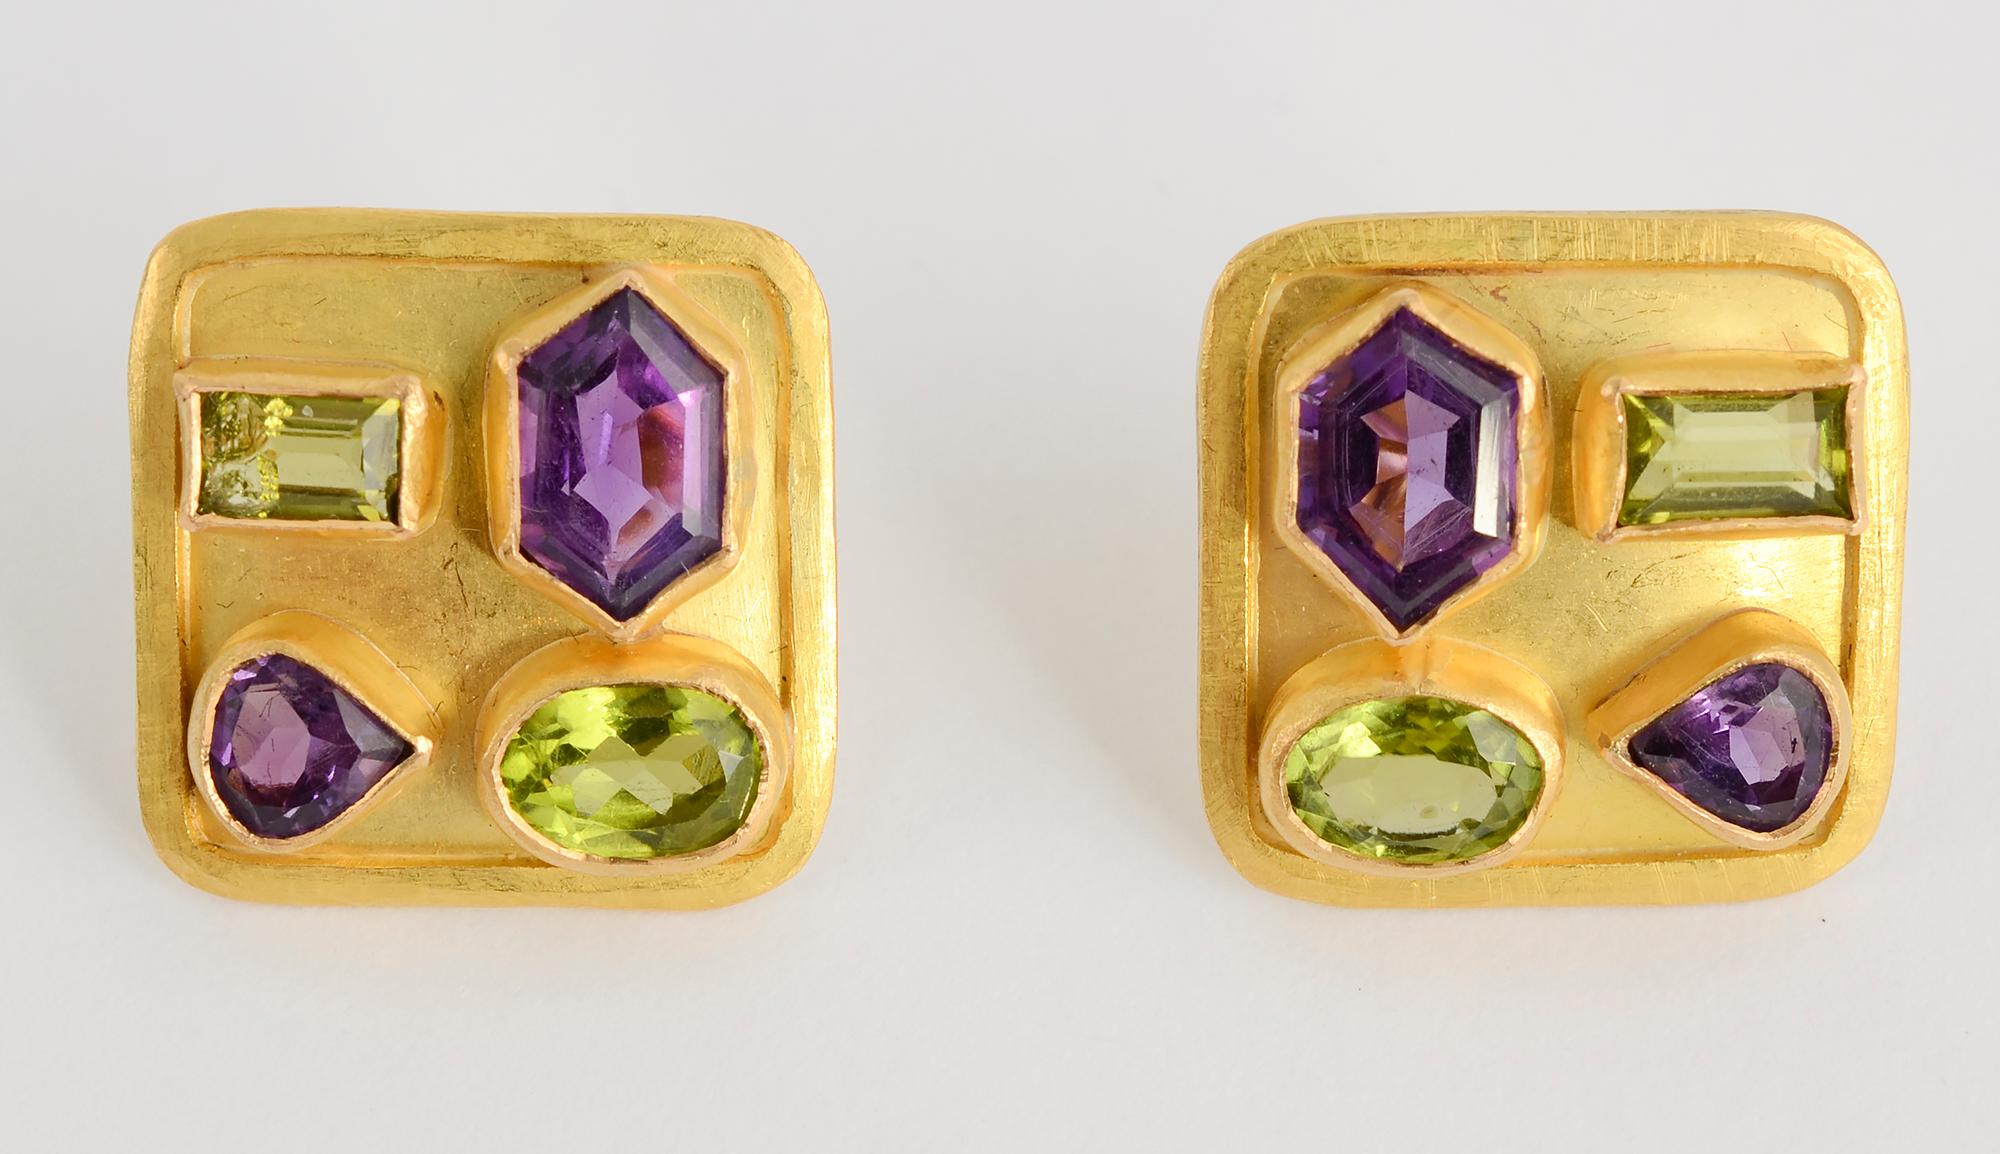 Artist made earrings and matching pendant. Irregular shaped amethysts and peridots make a wonderful design on a 22 karat matte ground. The earrings measure 3/4